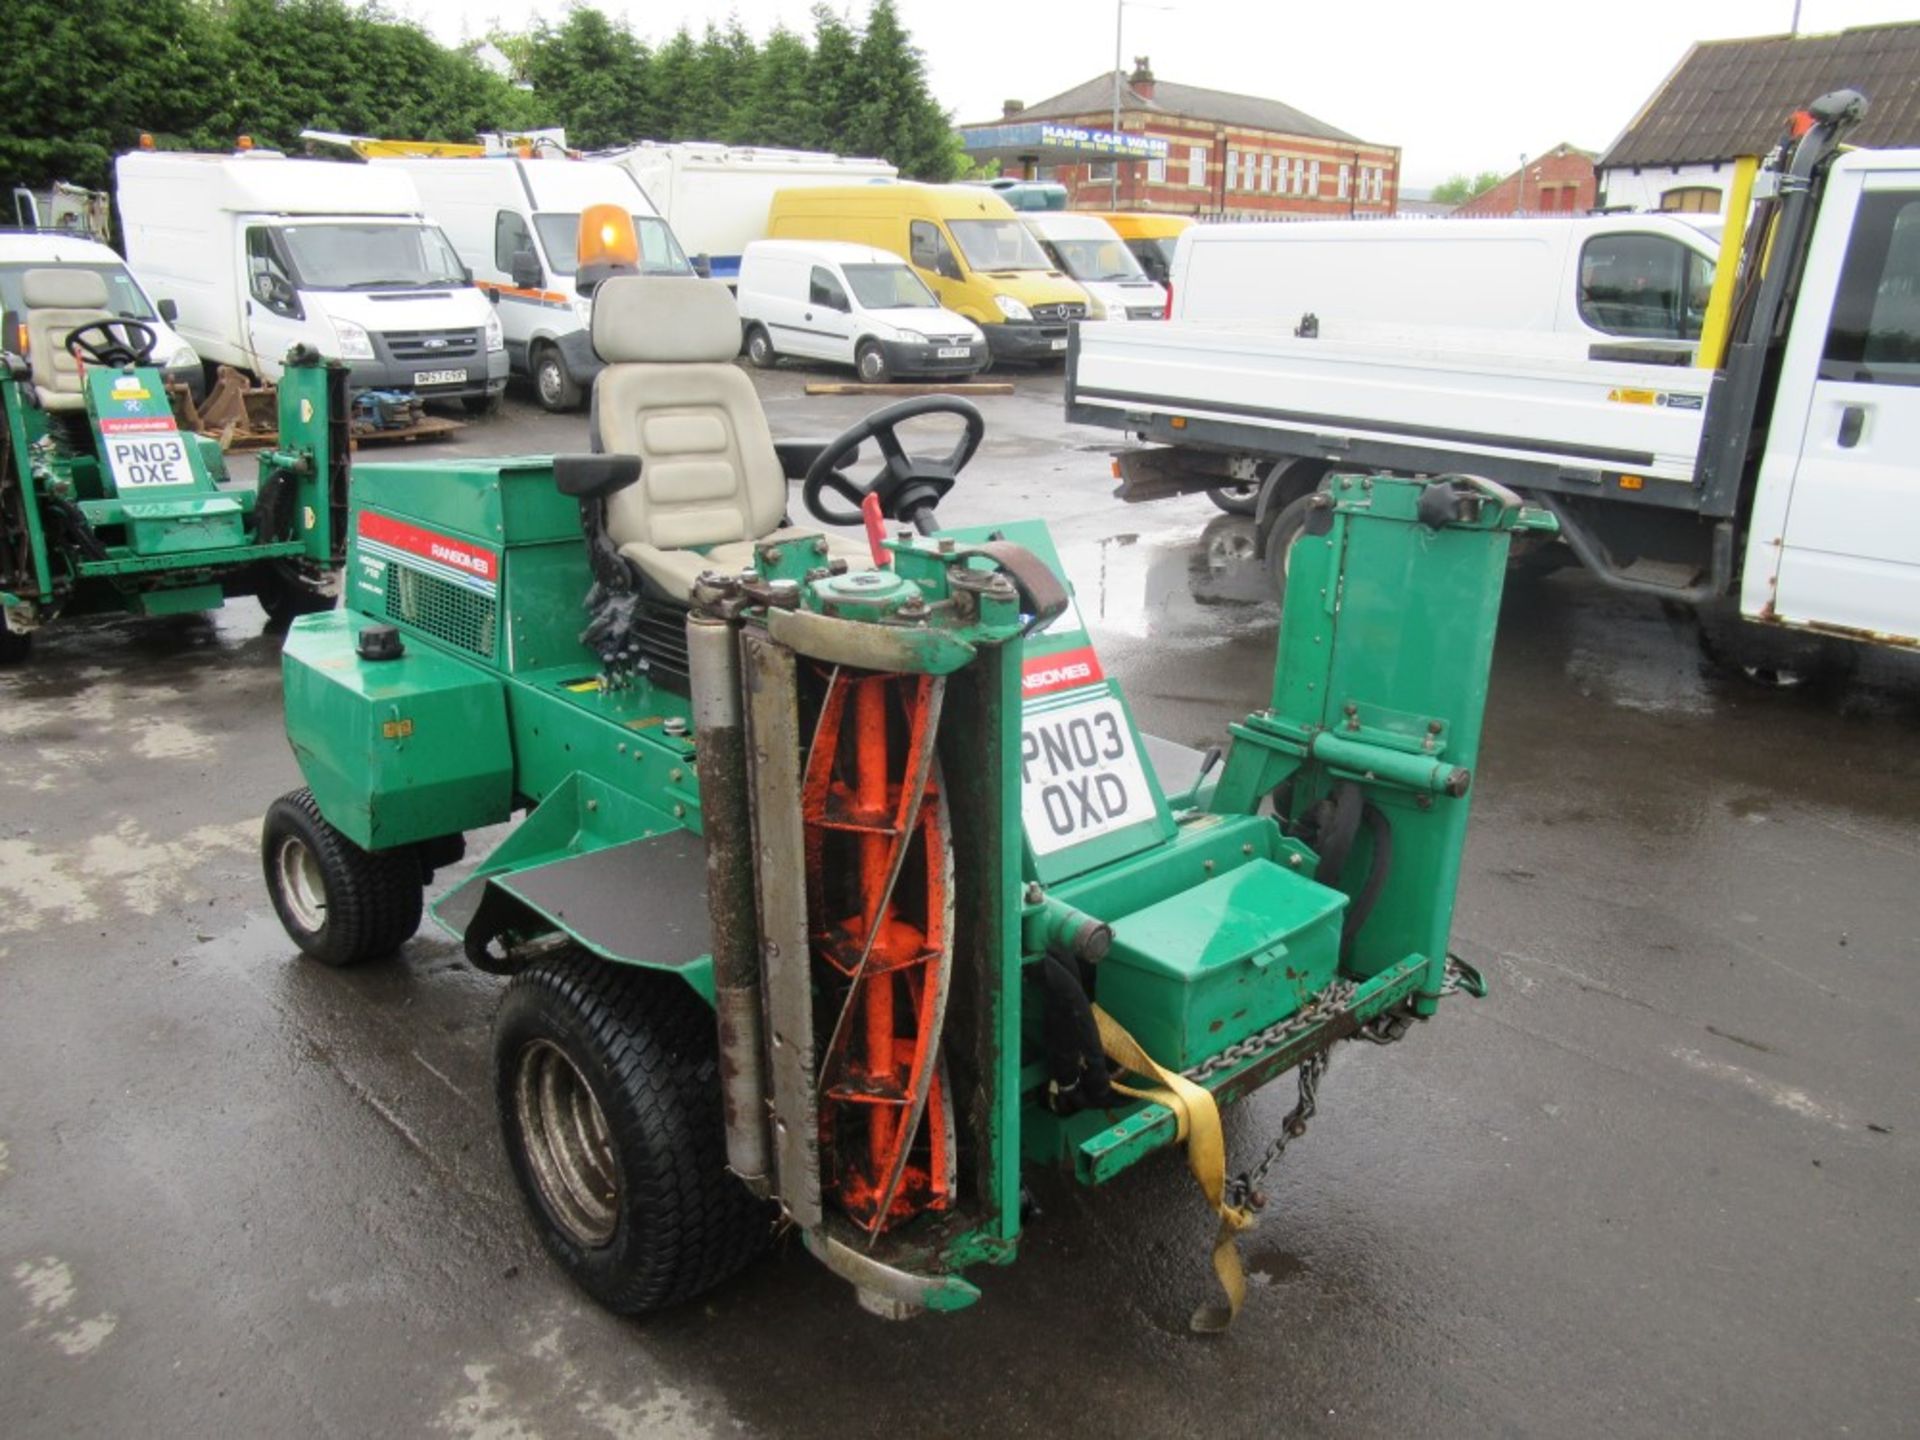 03 reg RANSOMES HIGHWAY 2130 RIDE ON MOWER (DIRECT COUNCIL) 2206 HOURS NOT WARRANTED, NO V5 [+ VAT]